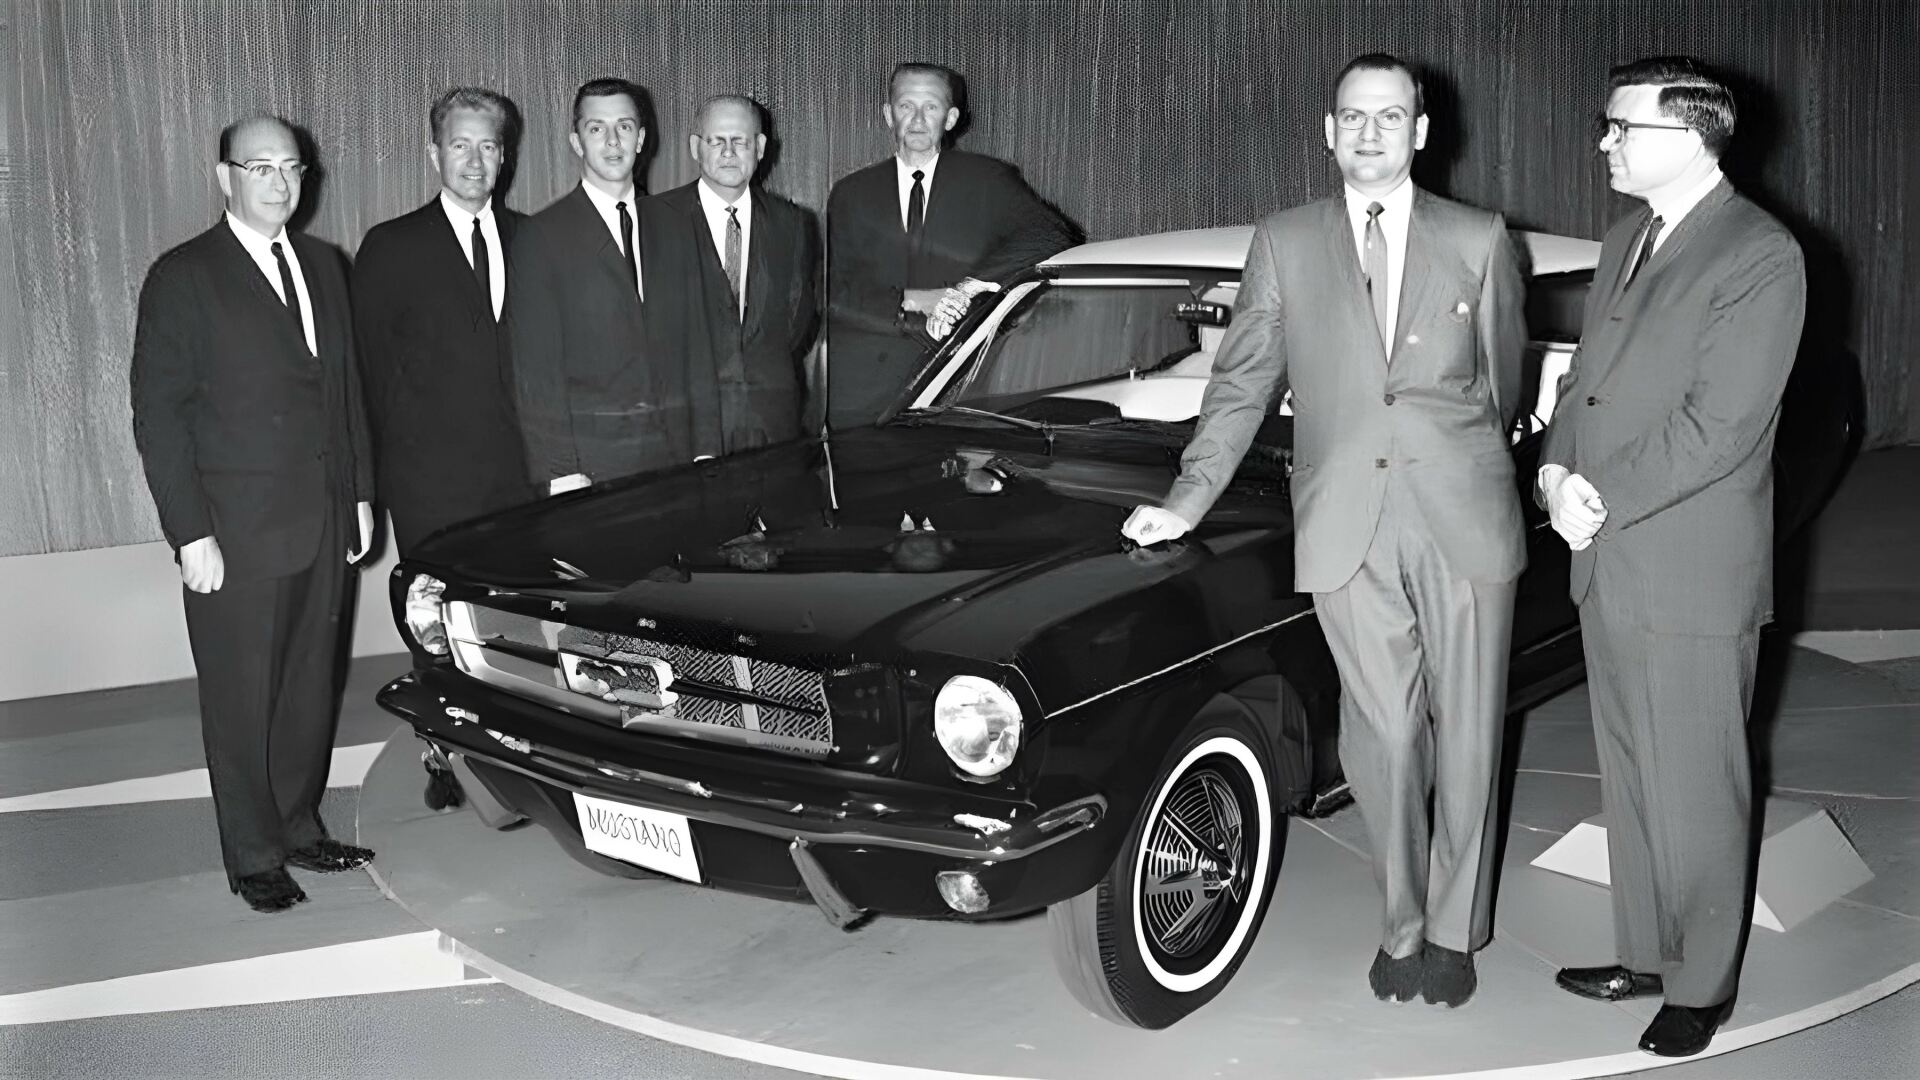 The 1964 World Fair Ford Mustang Team (Credits Automotive News)